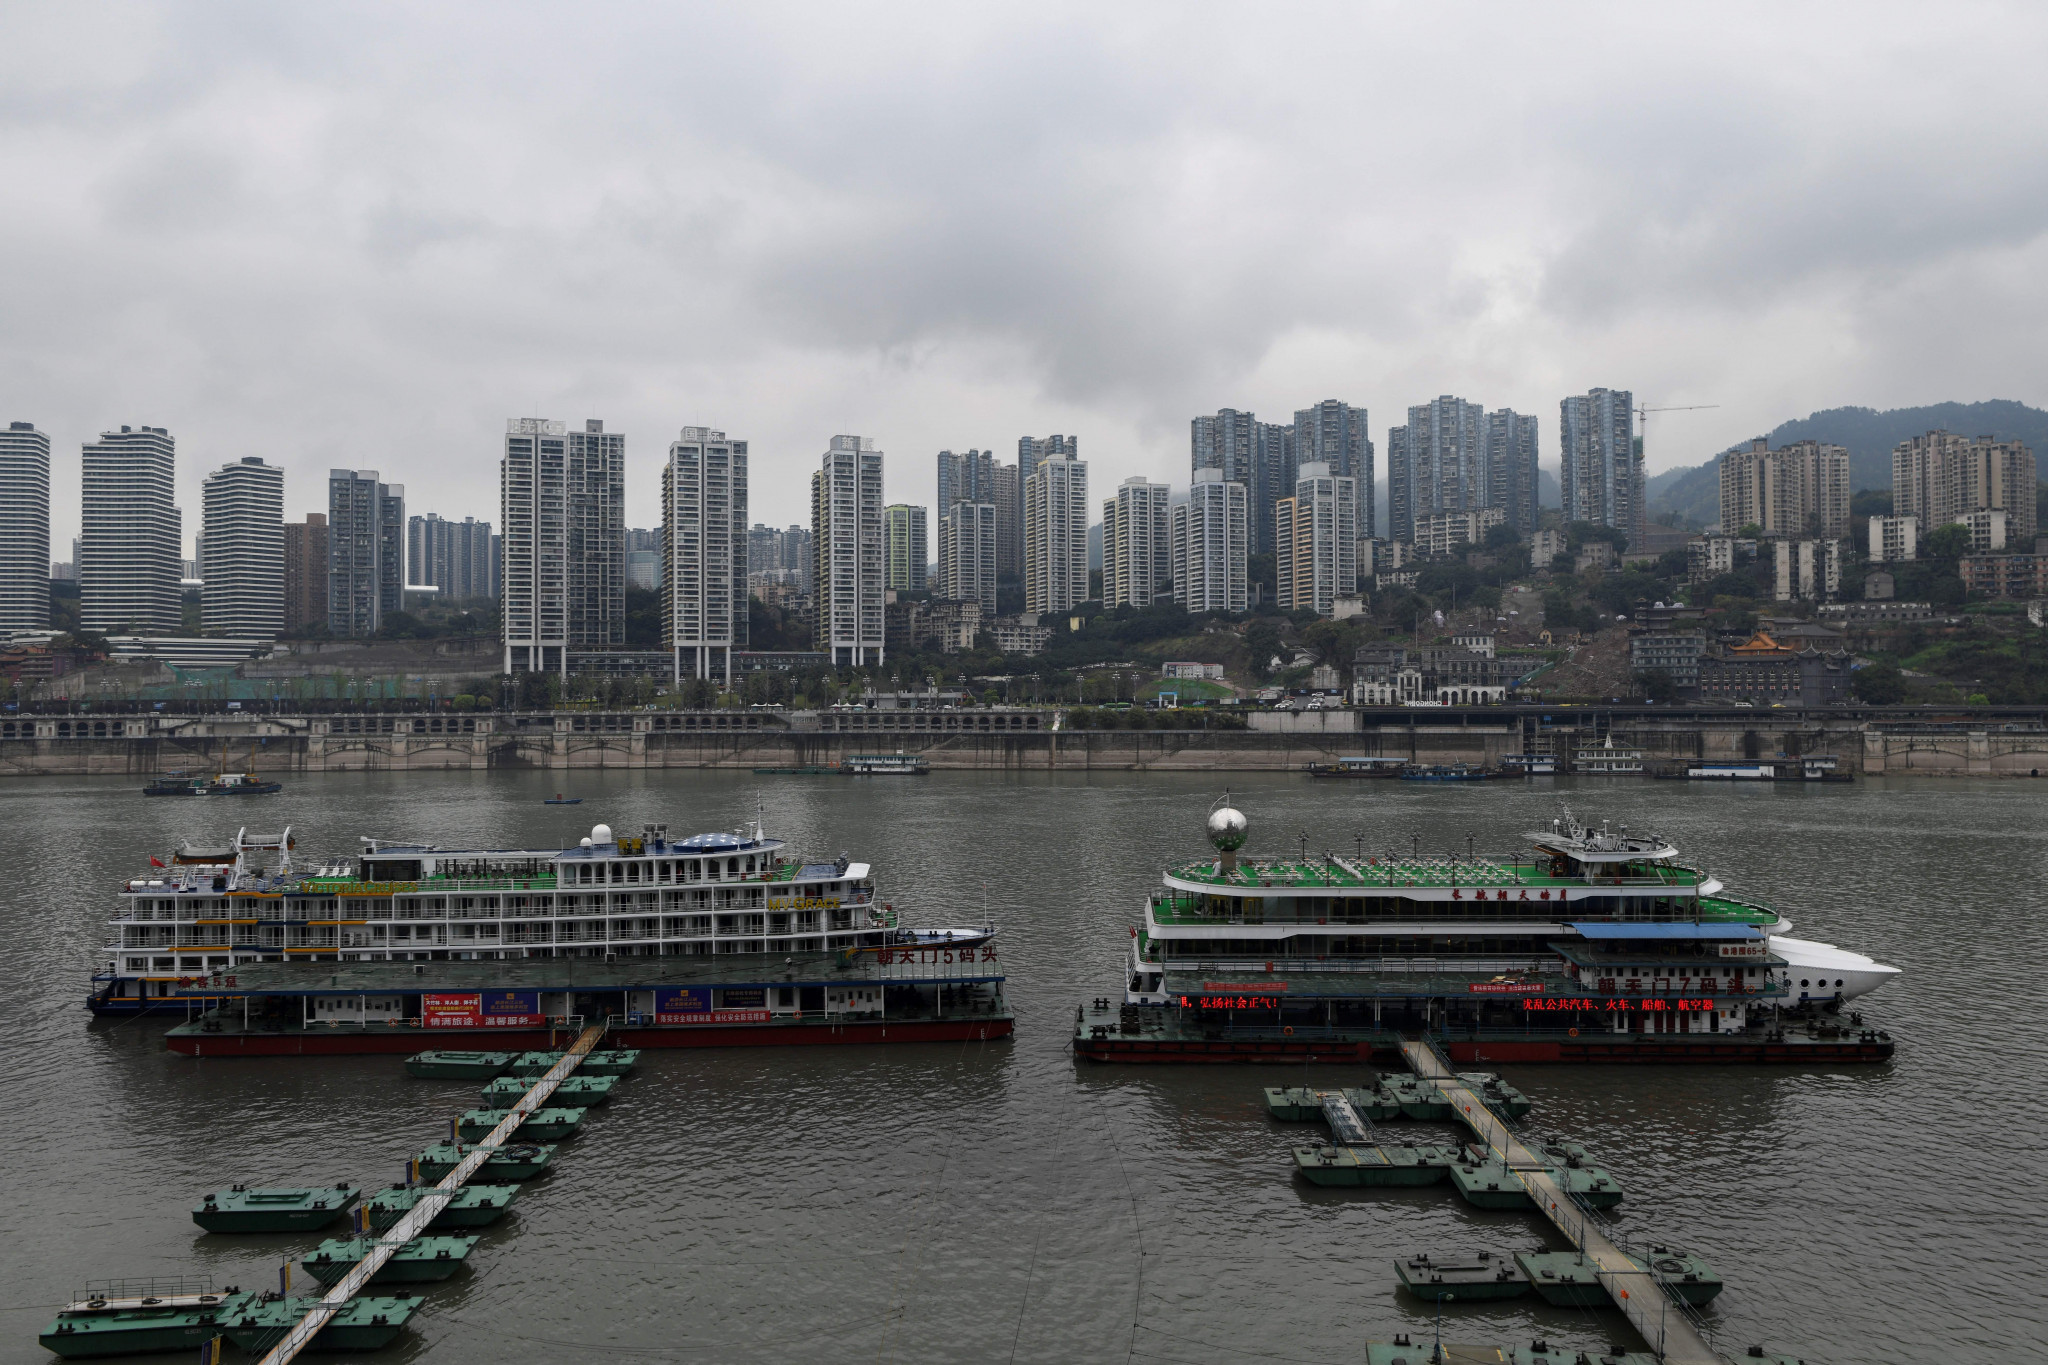 Chongqing was set to host the 2022 International Weightlifting Federation World Championships in November ©Getty Images